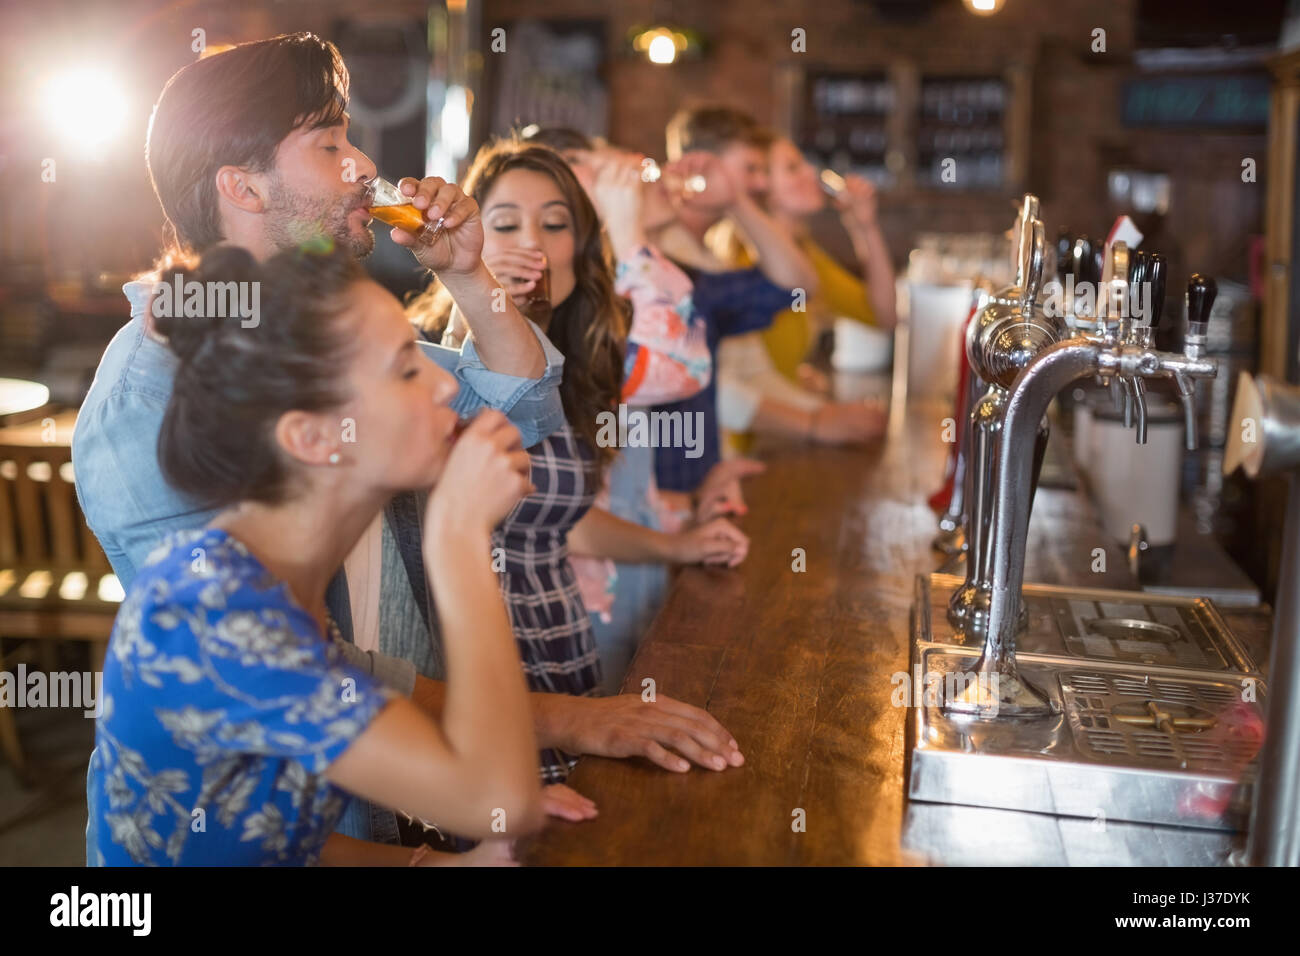 Friends drinking vodka shorts by counter in bar Stock Photo